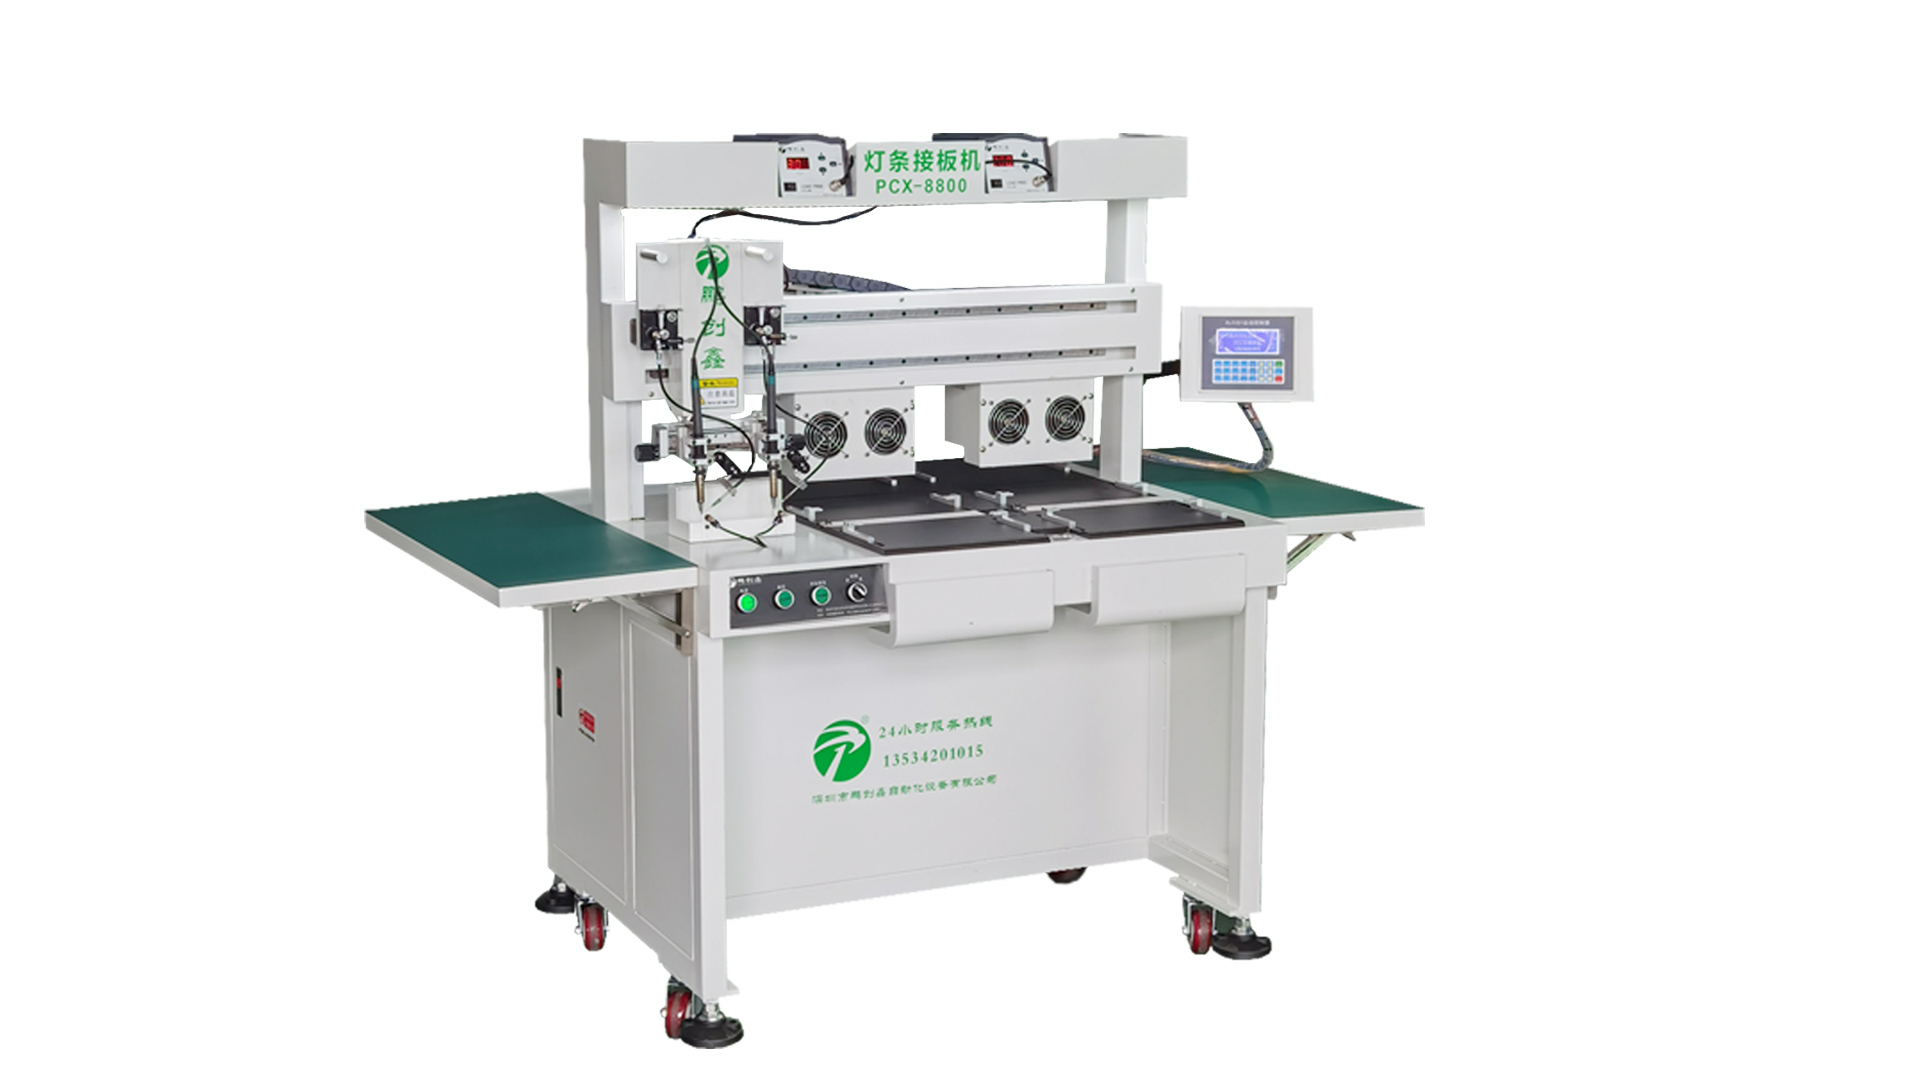 LED strips soldering machine PCX-8800（Double workbench）